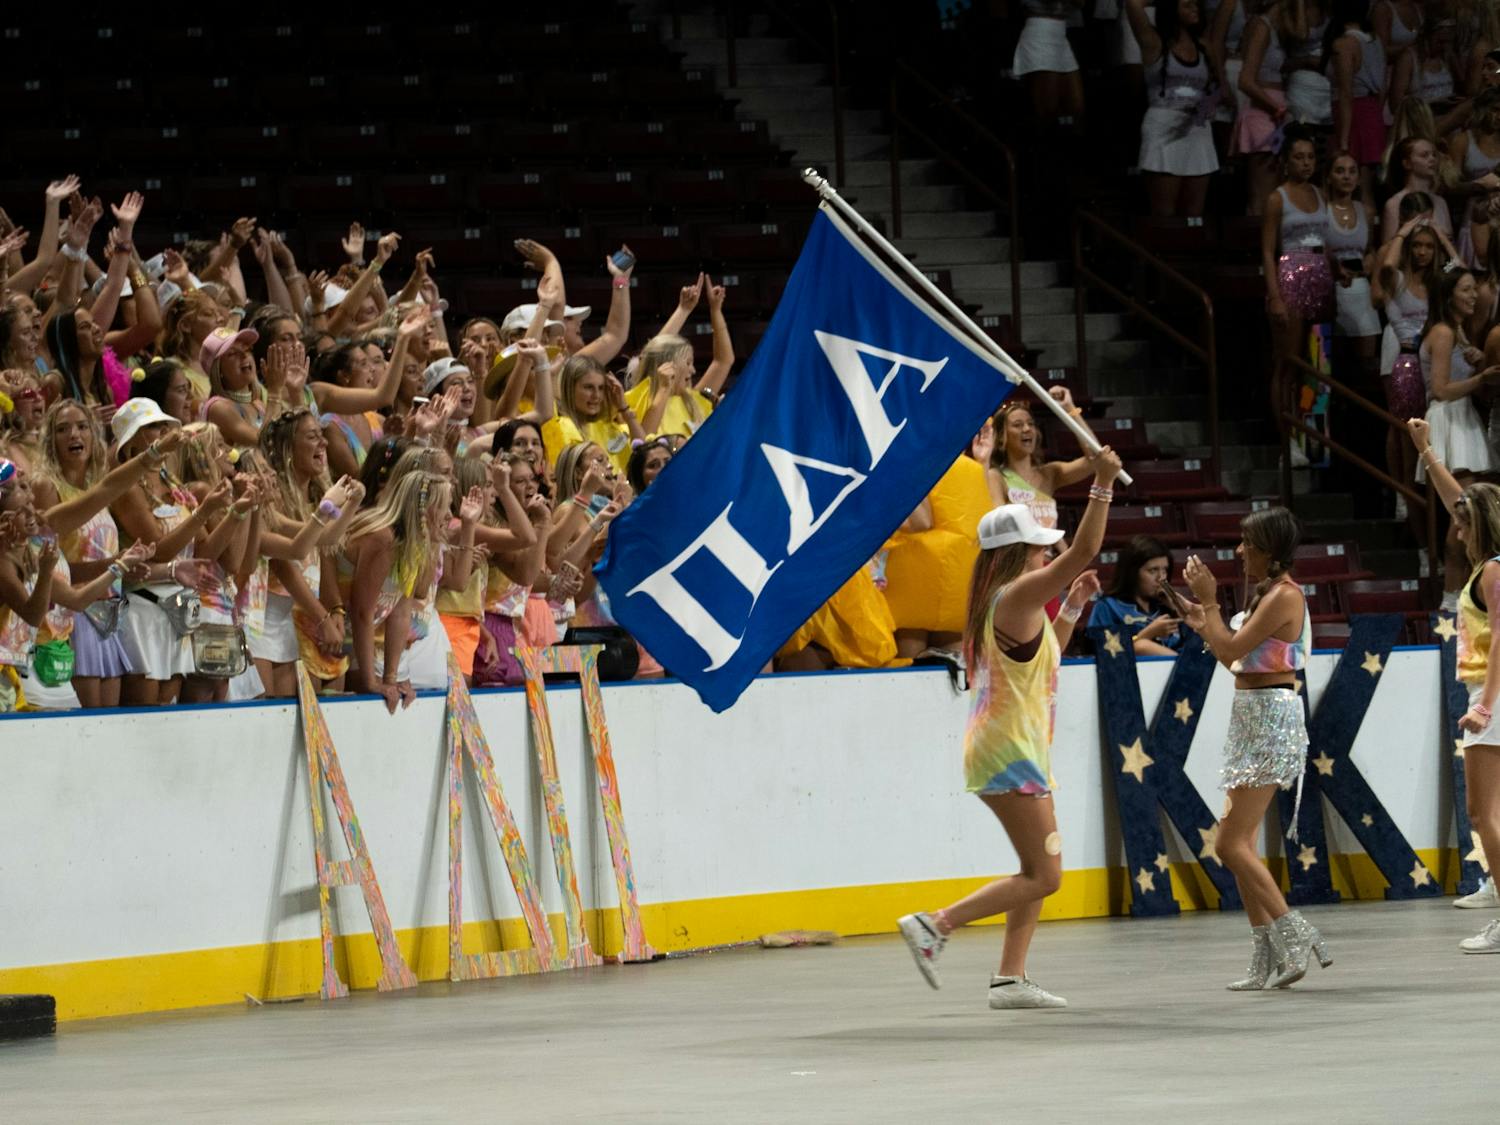 USC sororities gathered Sunday, Aug. 21, 2022 at the Colonial Life Arena for Bid Day. Several chapters took part in the event to welcome new faces to the USC Greek community.